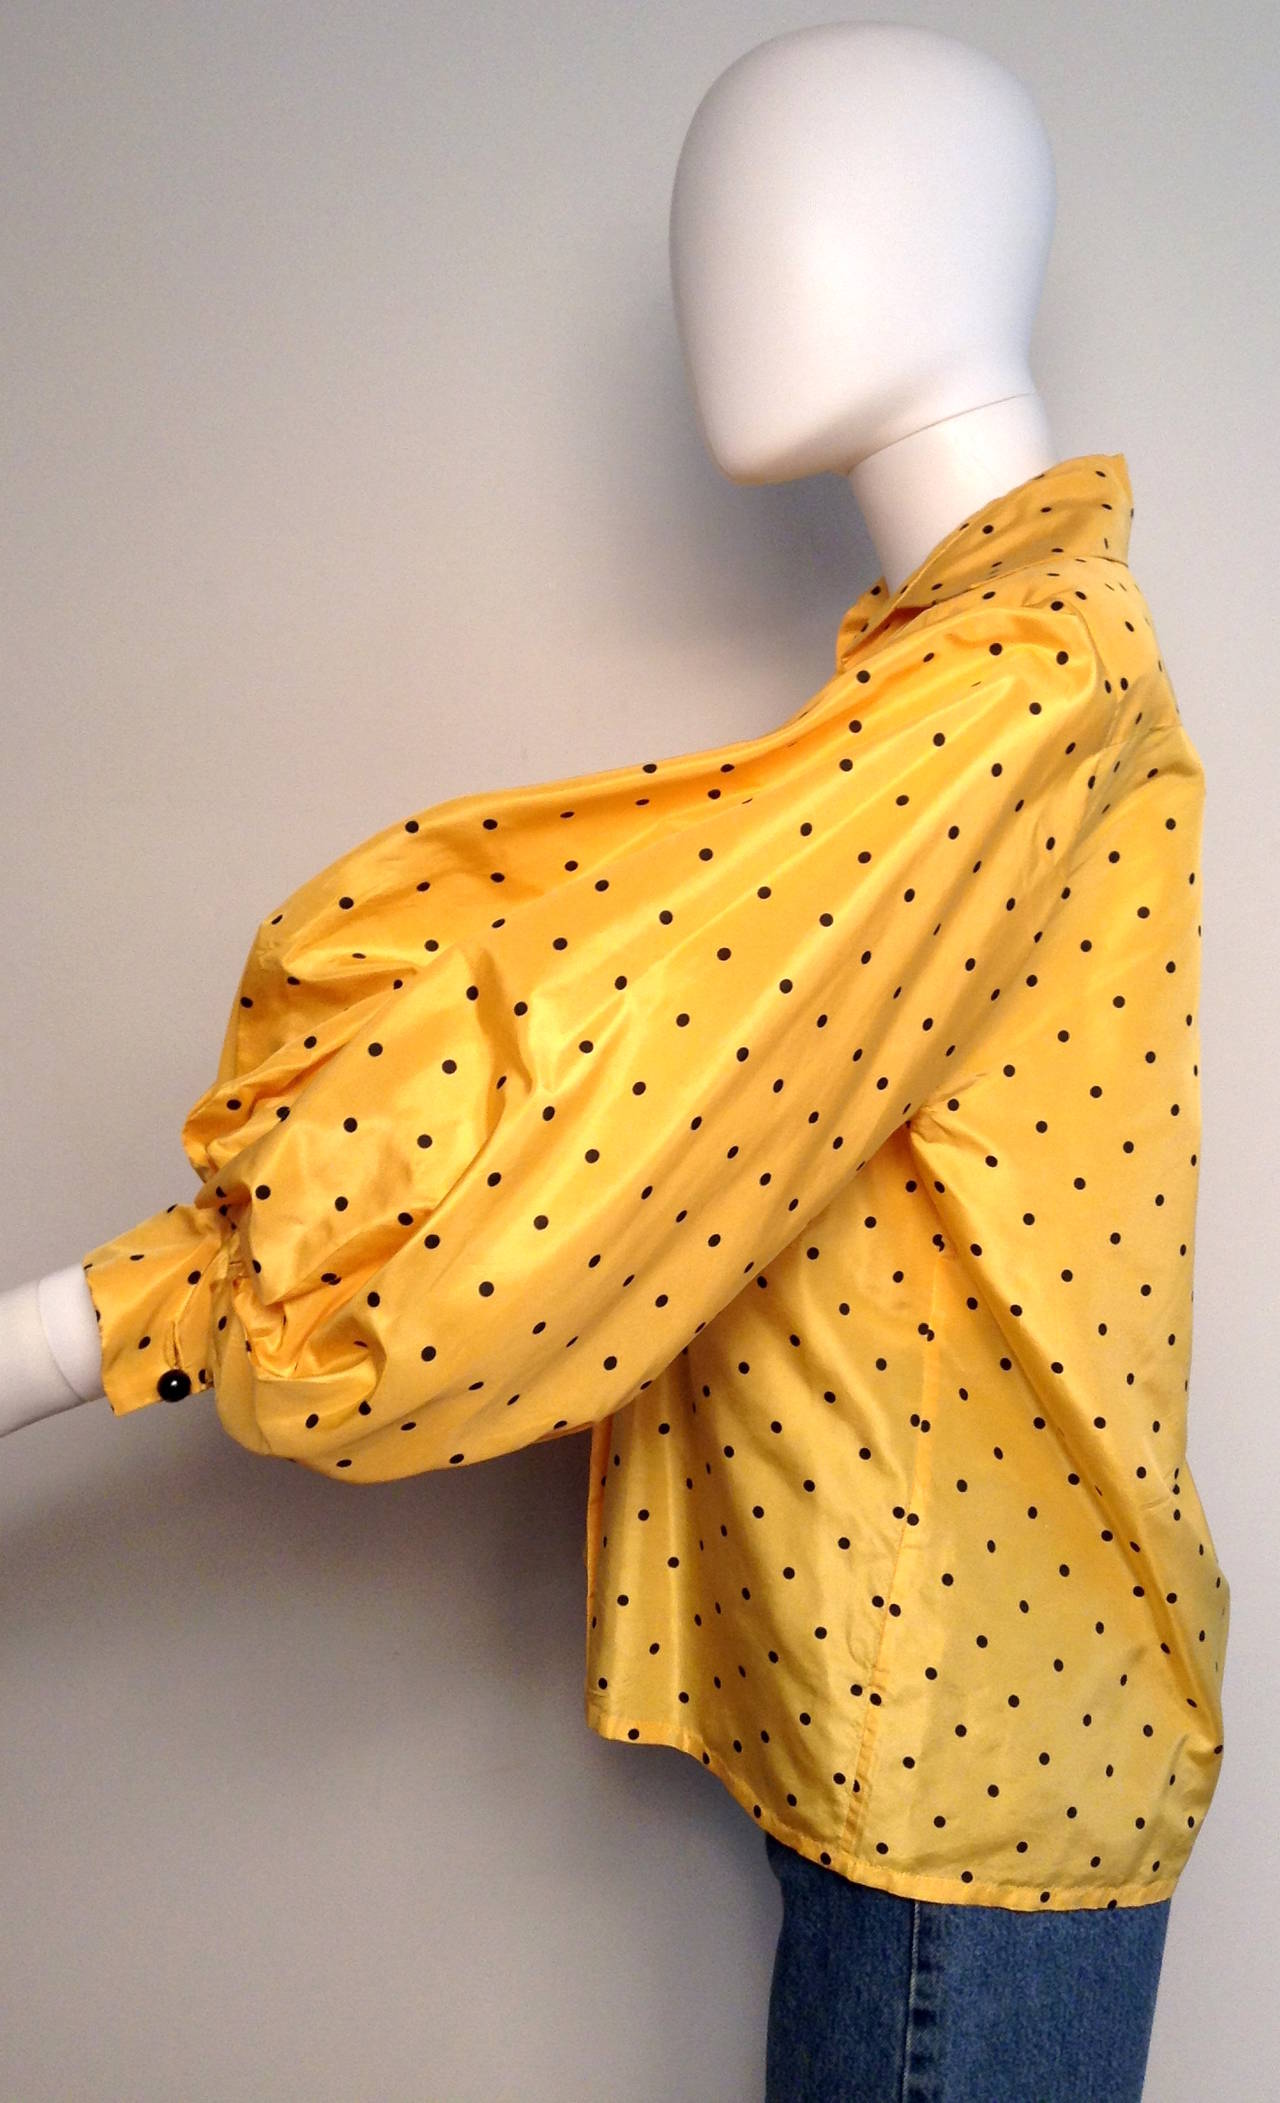 Super fun Yellow and Black Polka Dot Blouse by none other than Christian Dior. Features three quarter sleeves, and button up closure. 

Measurements: 43